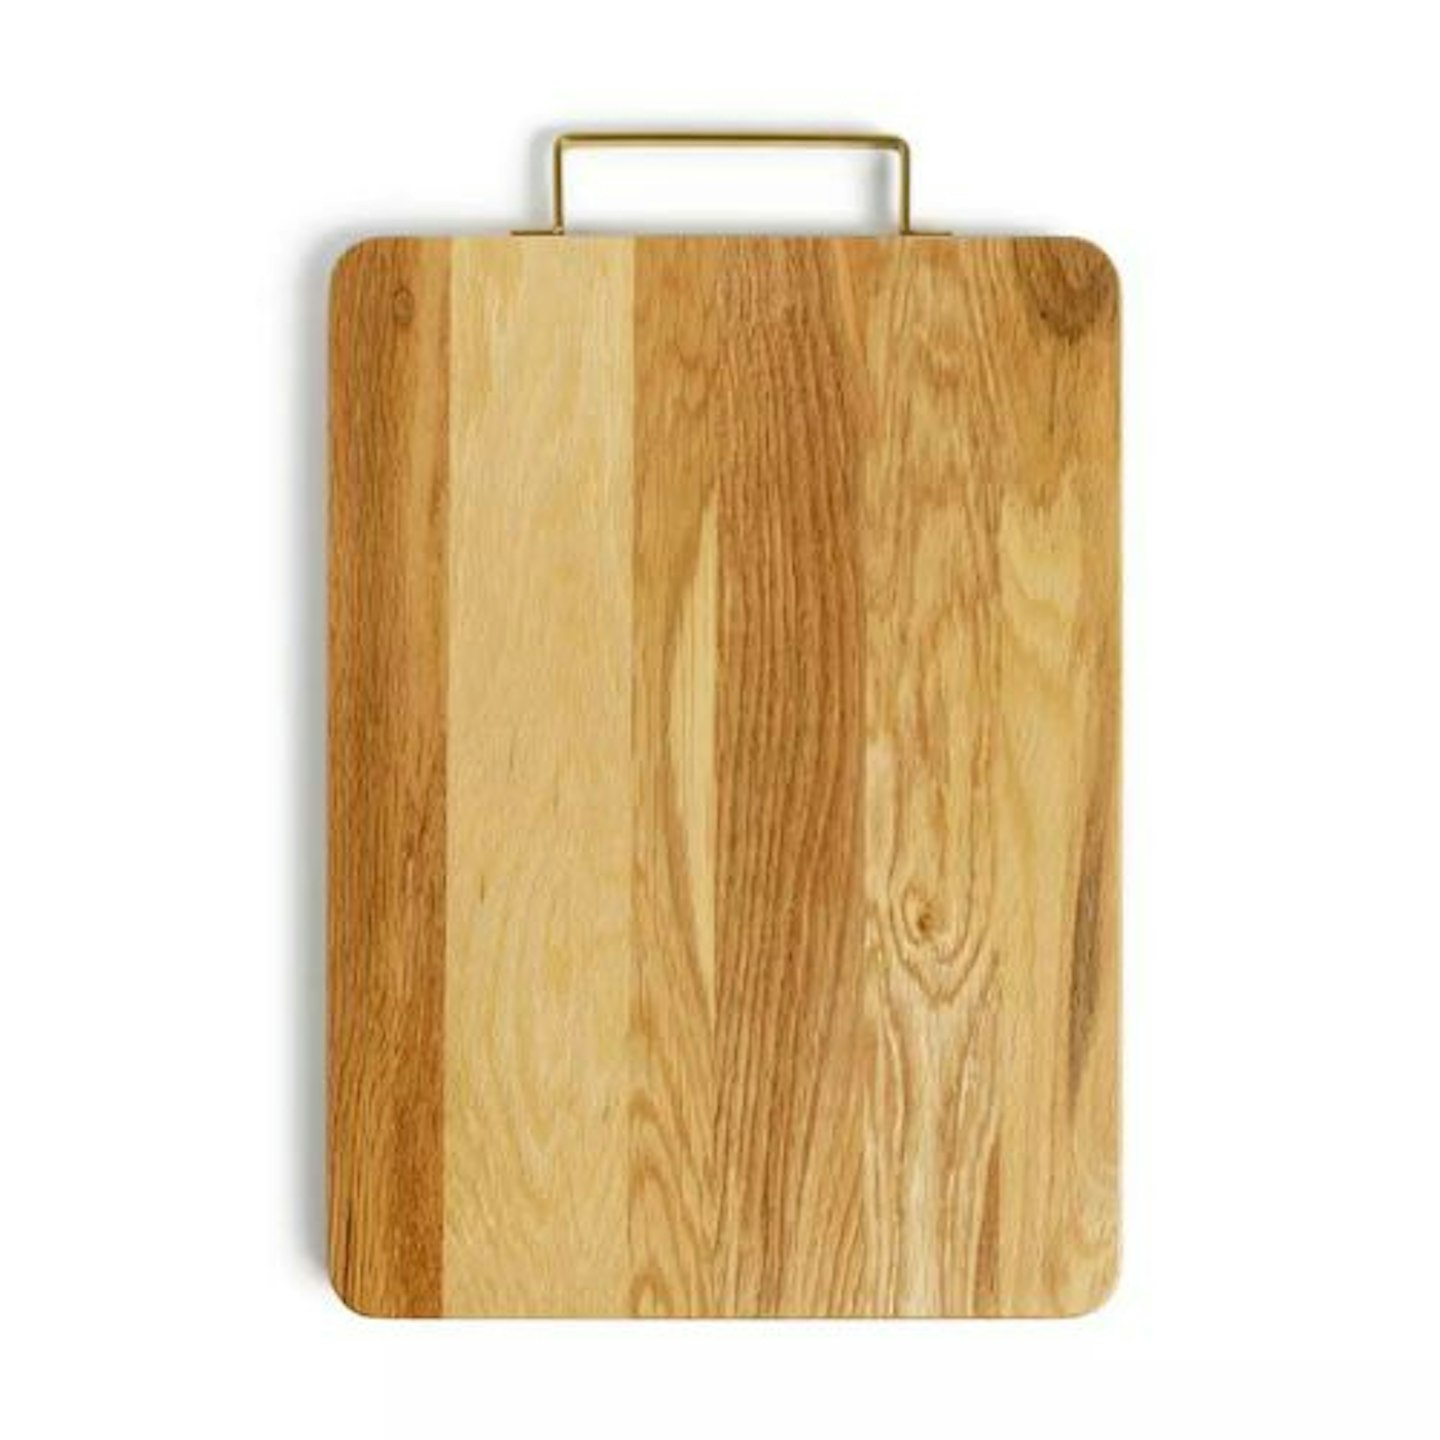 2-in-1 Extra-Large Wooden Chopping Board & Serving Tray - by LARHN